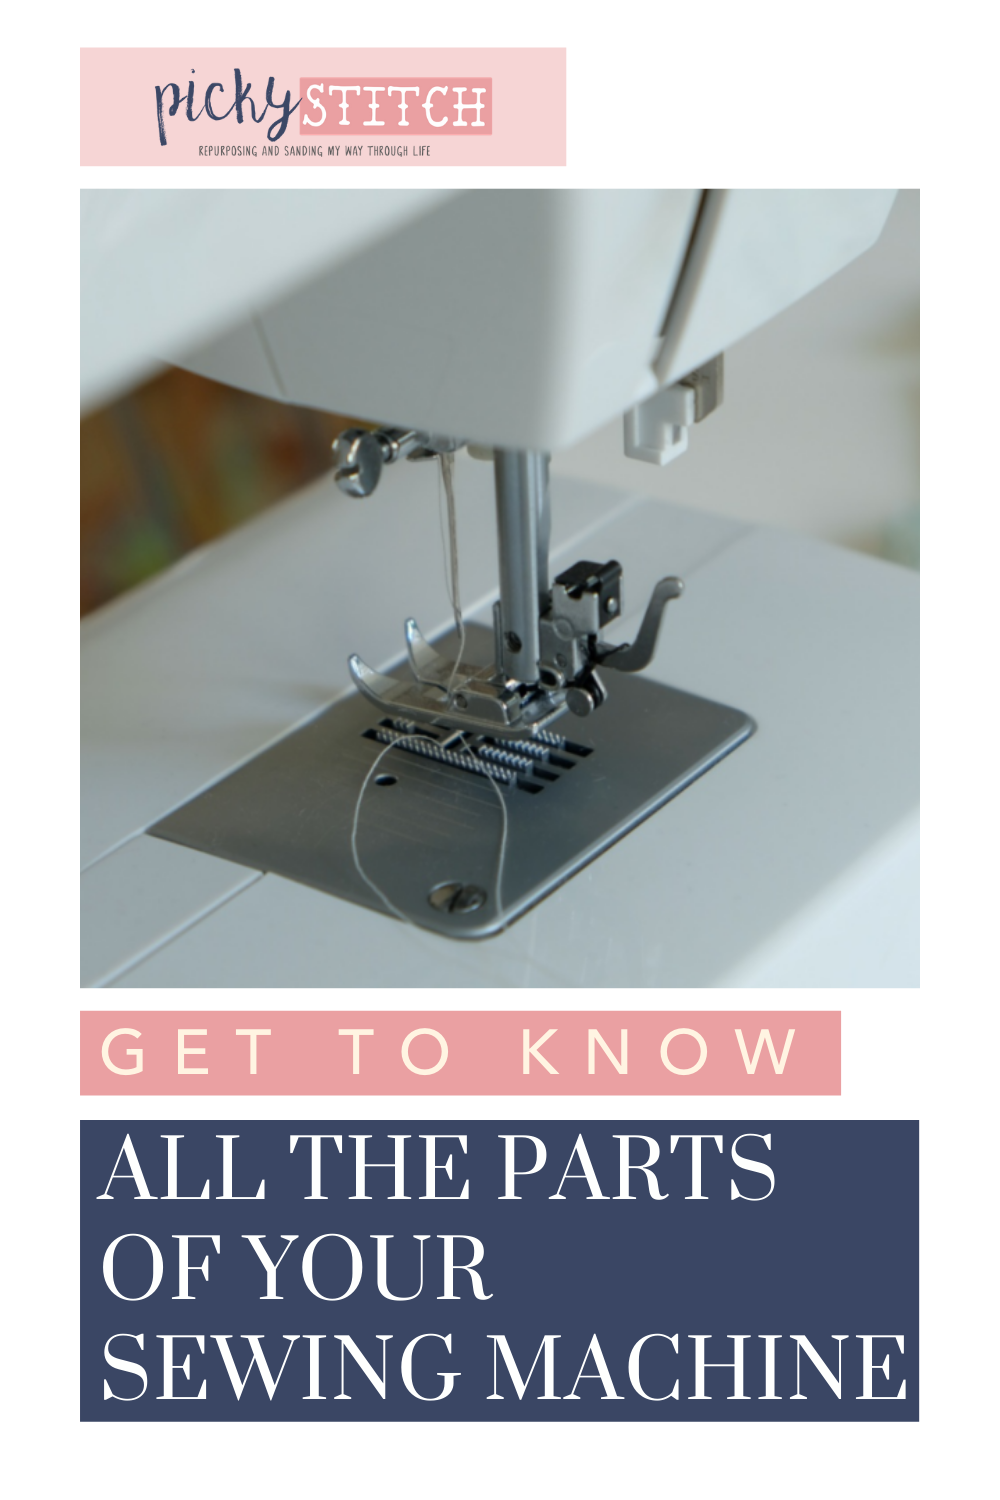 Pickystitch.com has all the best ideas to put the fun into craft projects! If you have a sewing machine, you might be overwhelmed by all of its functions. Check out this simple guide to learn the parts of your sewing machine now!